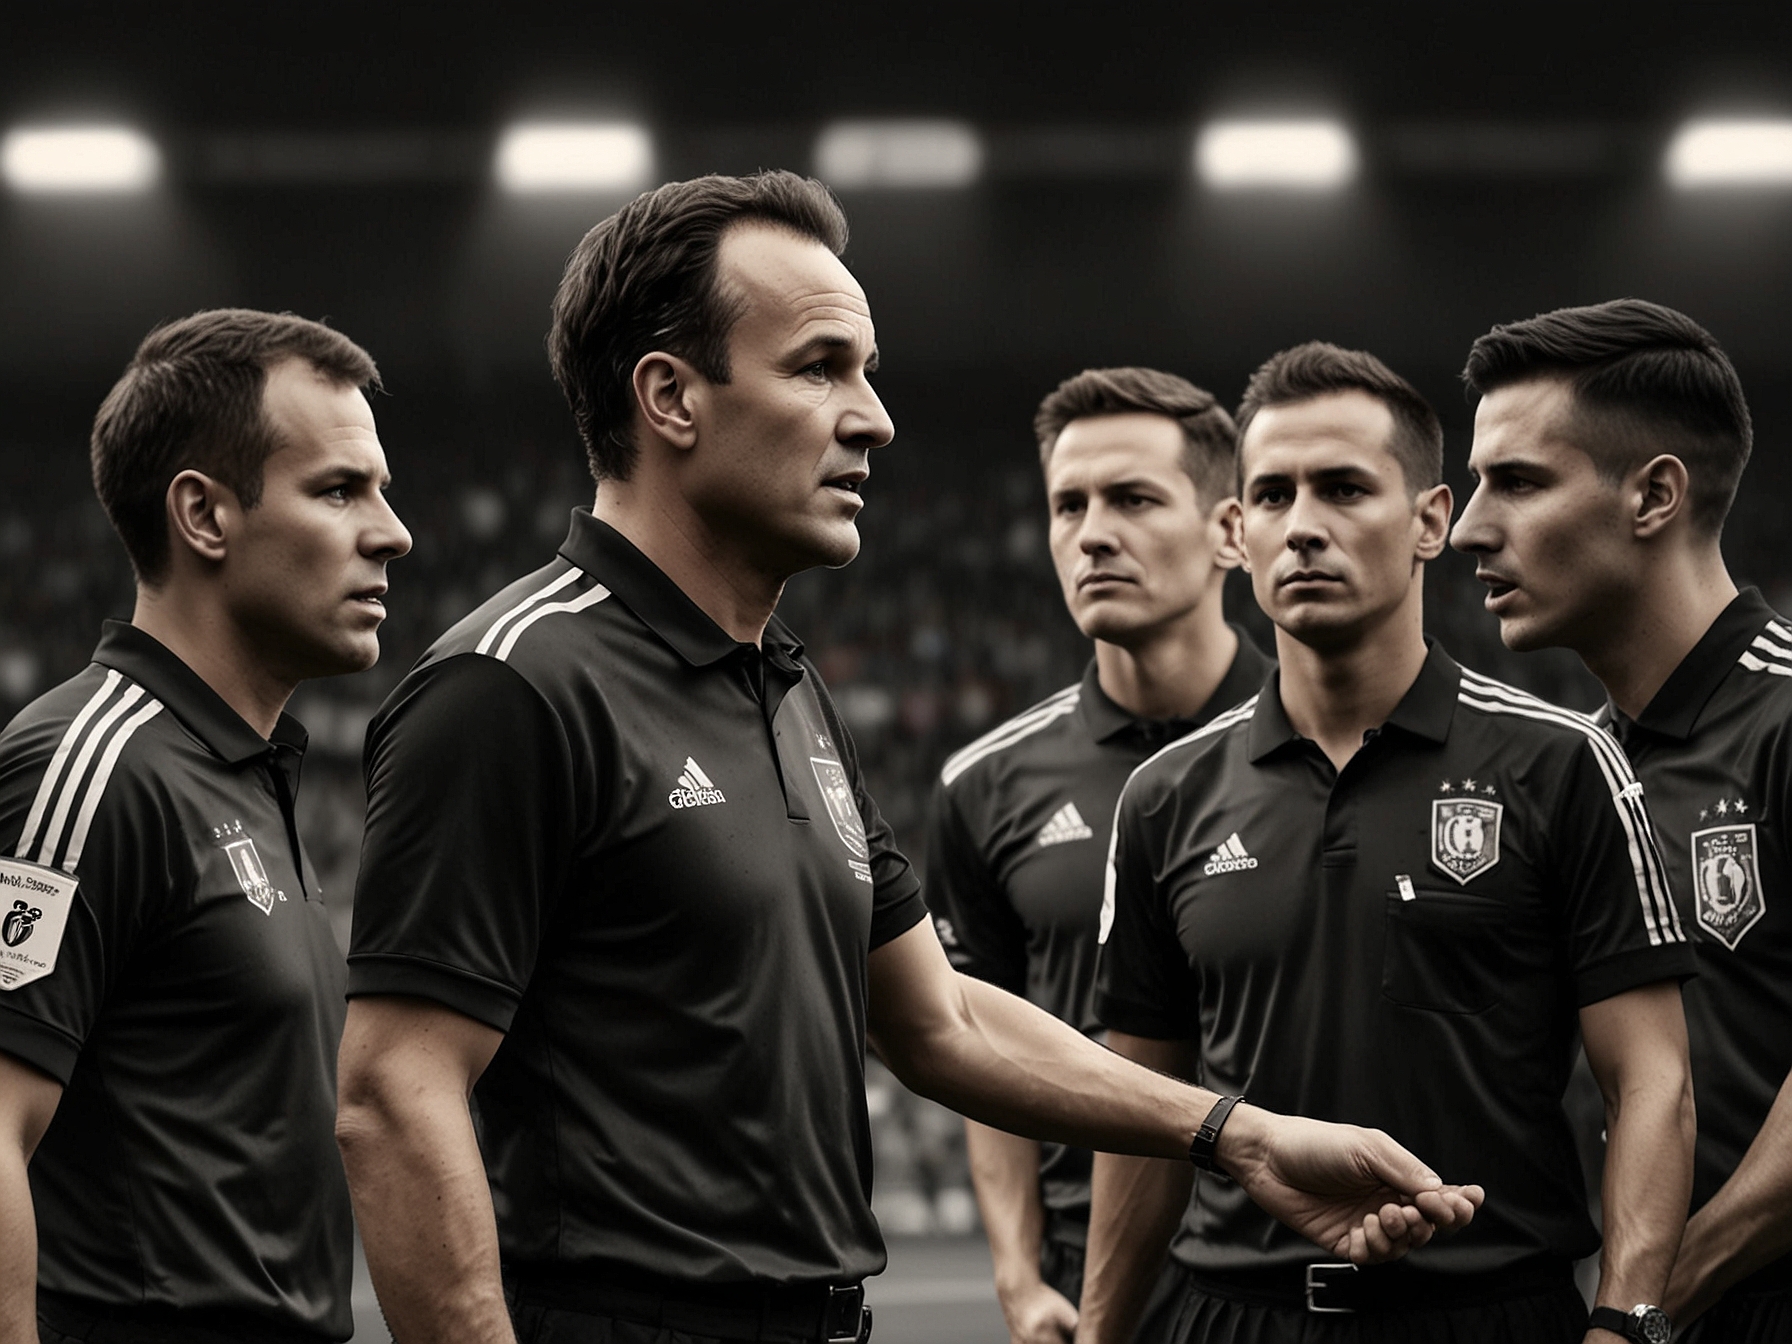 Referee Antonio Mateu Lahoz, surrounded by his assistant referees, prepares to officiate the high-stakes Belgium vs Slovakia match in Euro 2024.